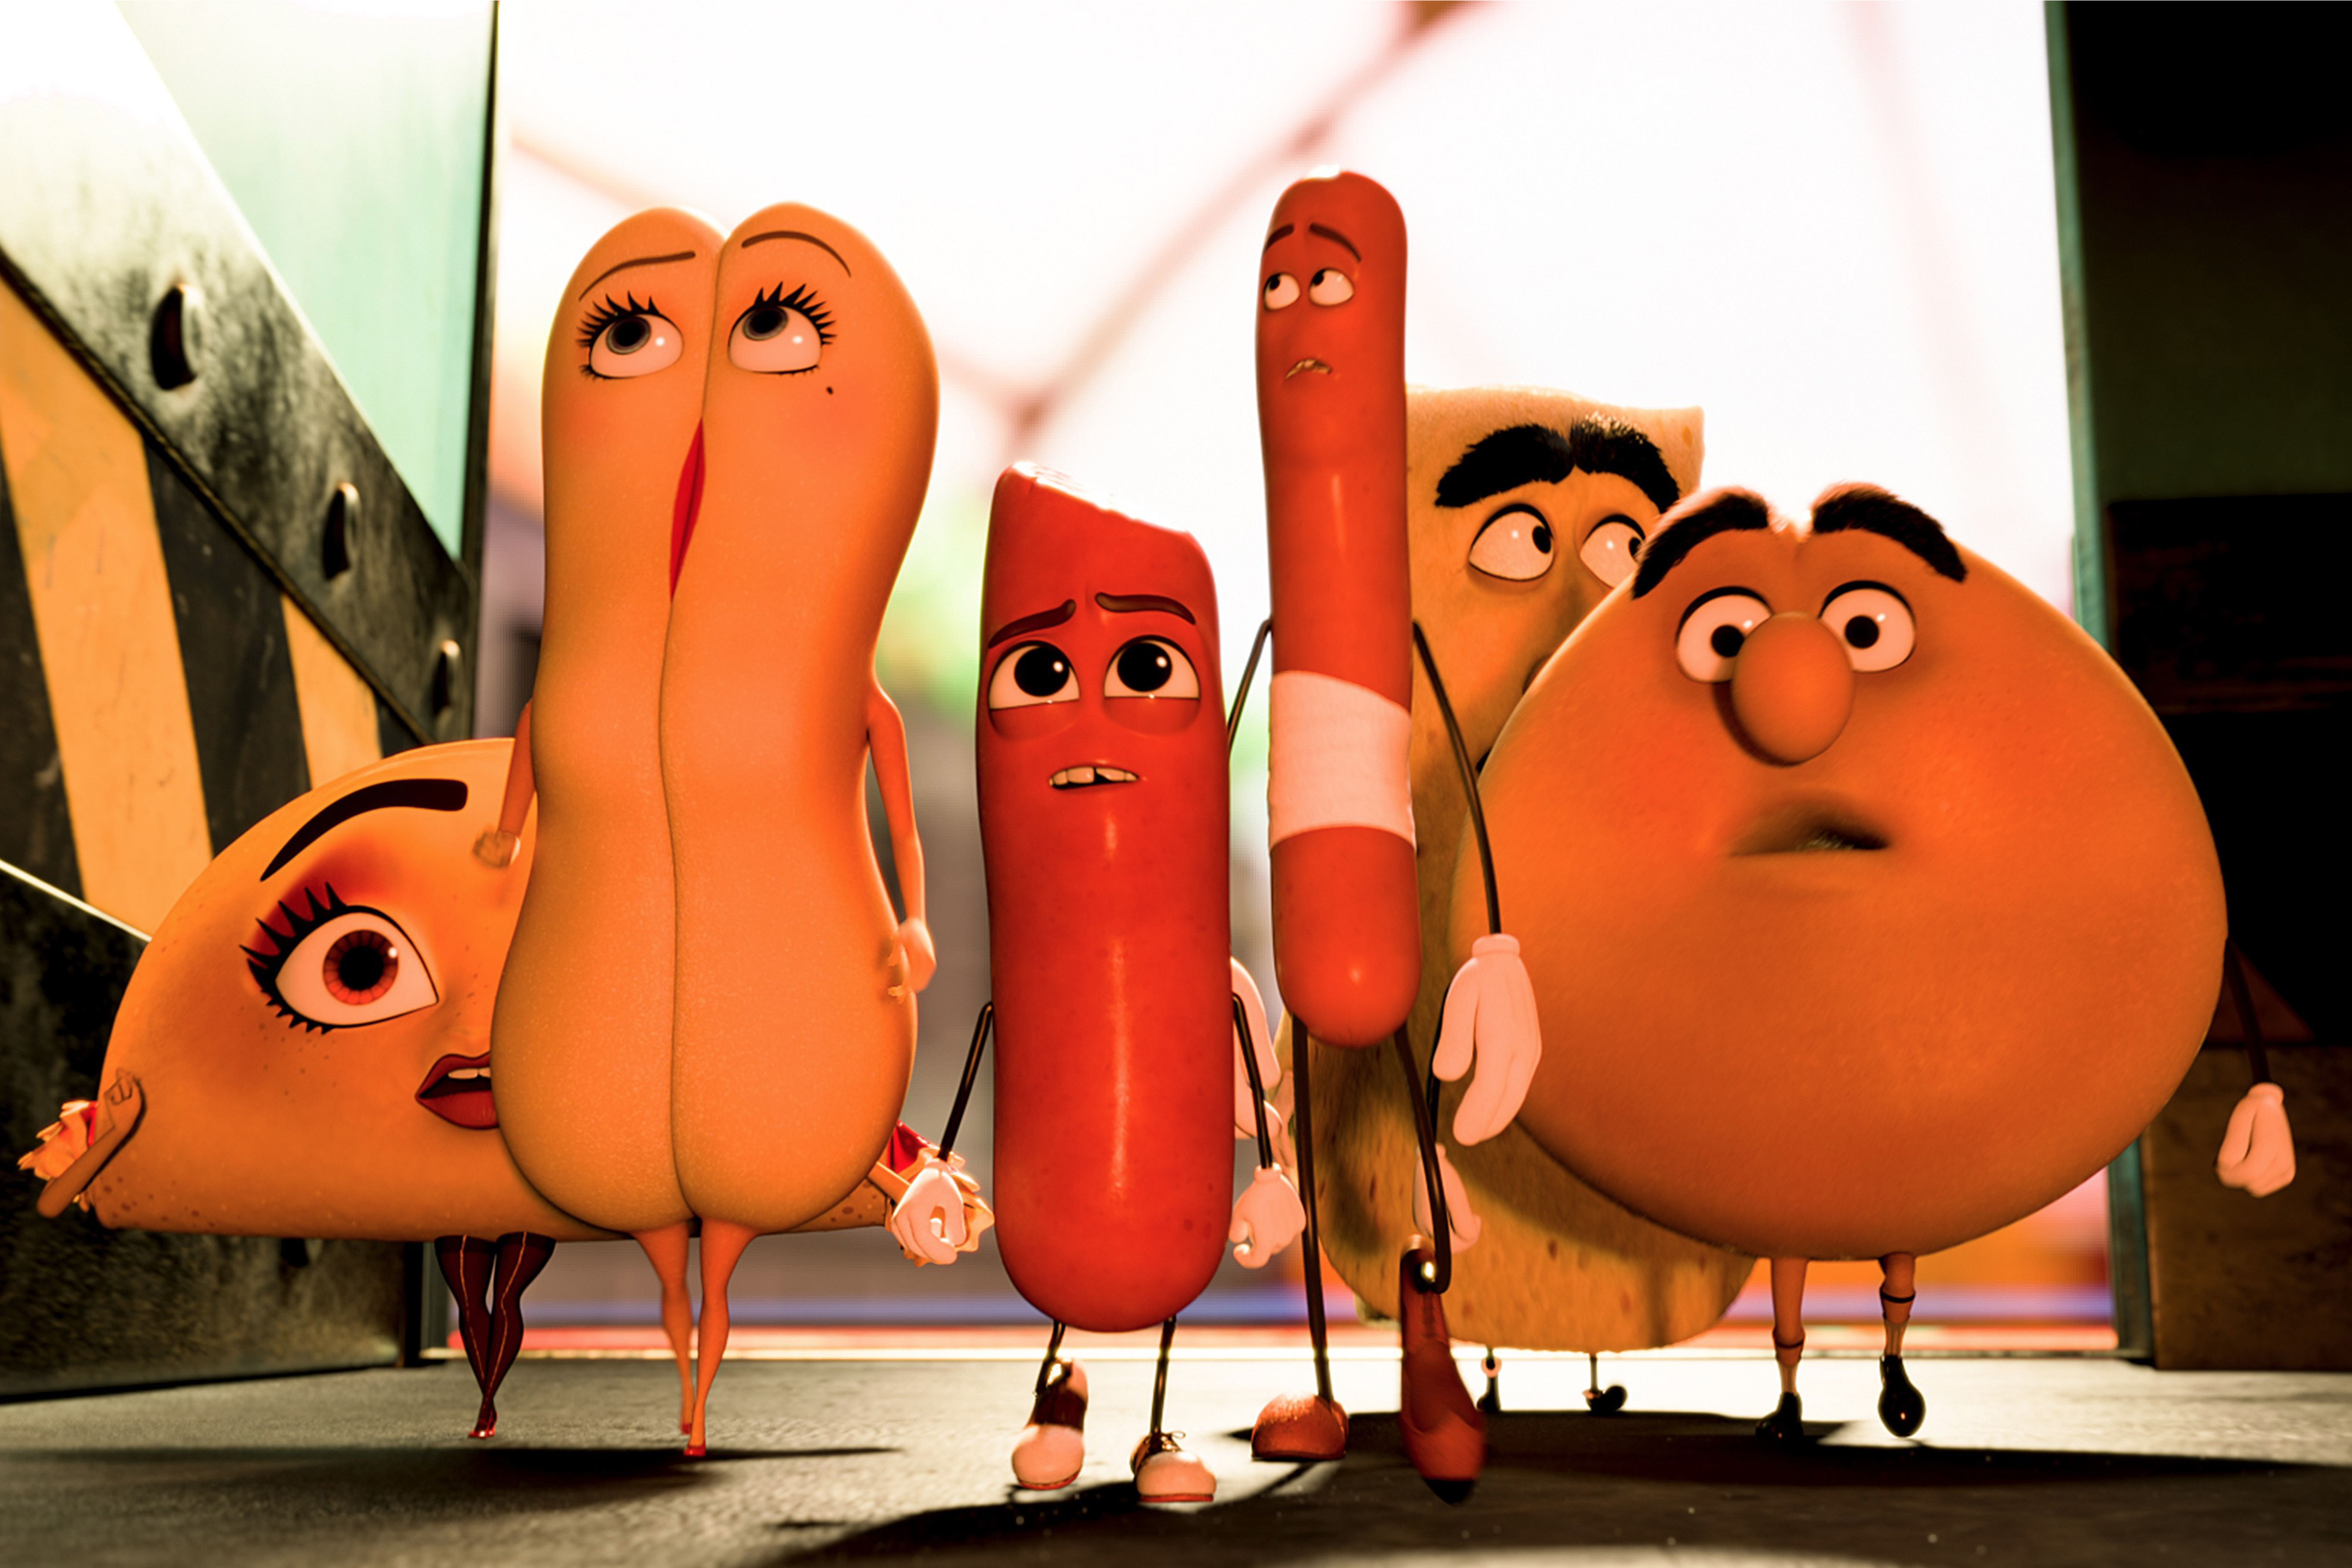 bernie bryan recommends sausage party orgy scene pic